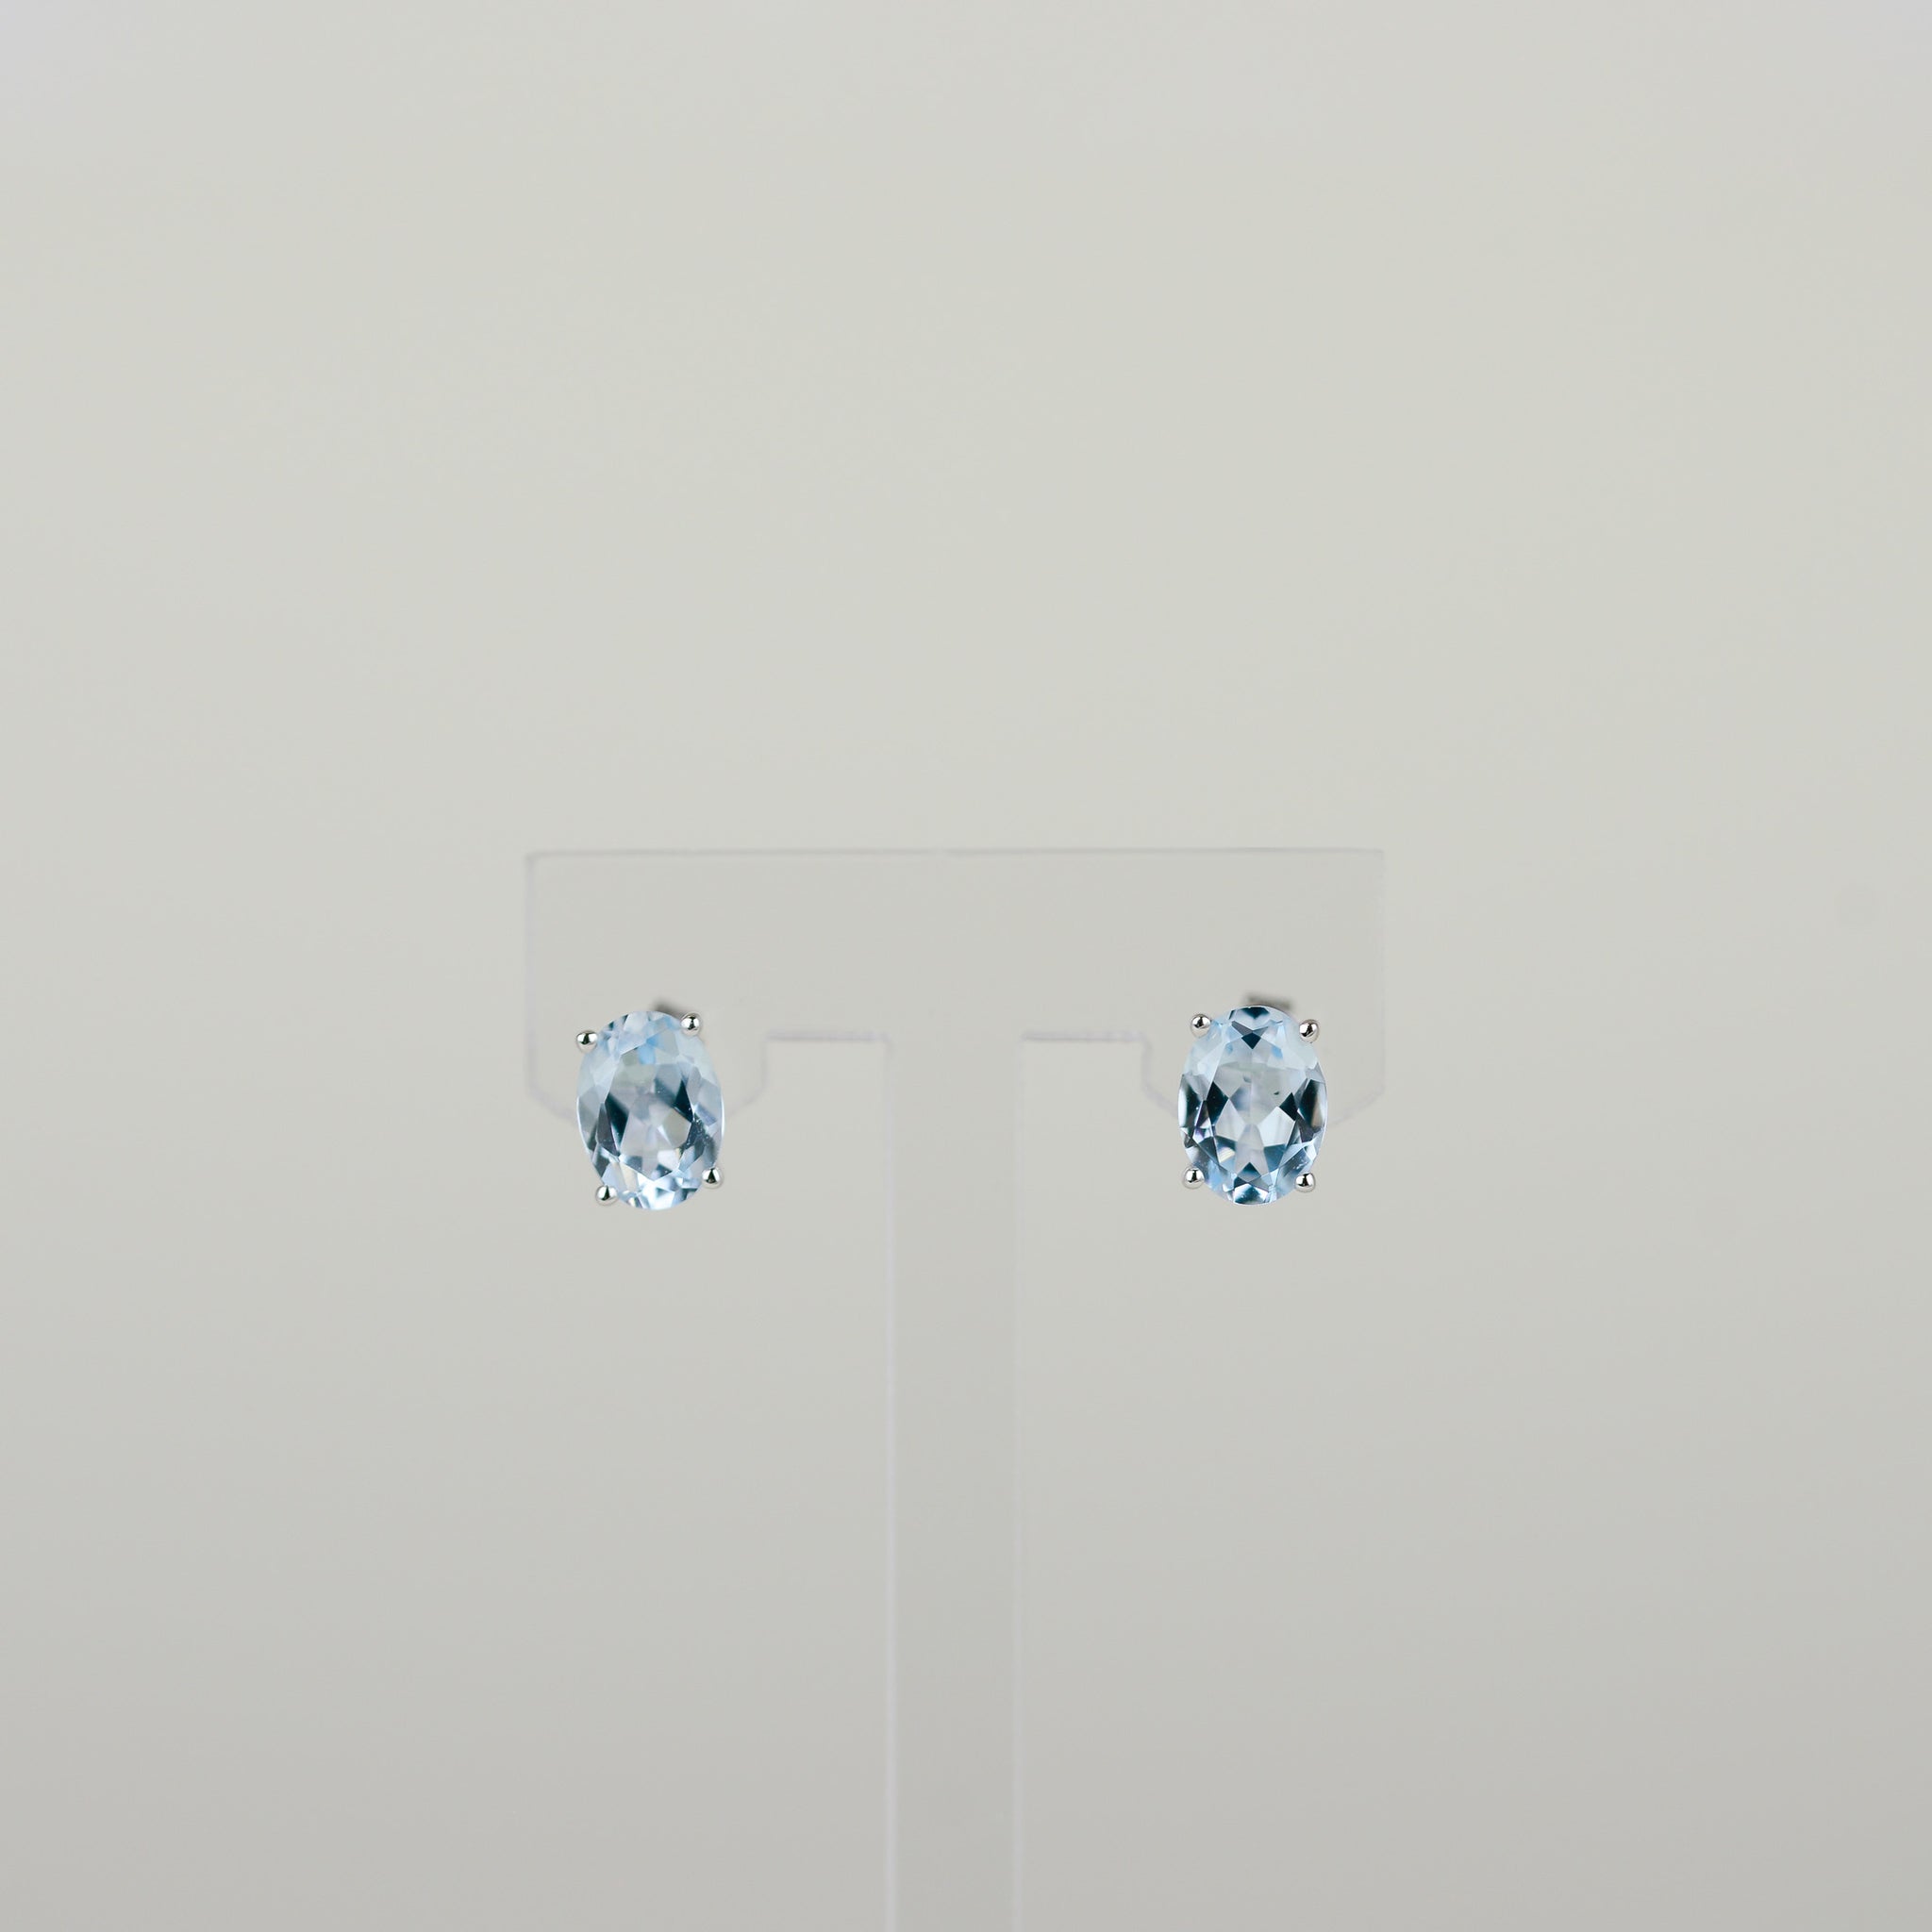 9ct White Gold 2.49ct Oval Blue Topaz Stud Earrings